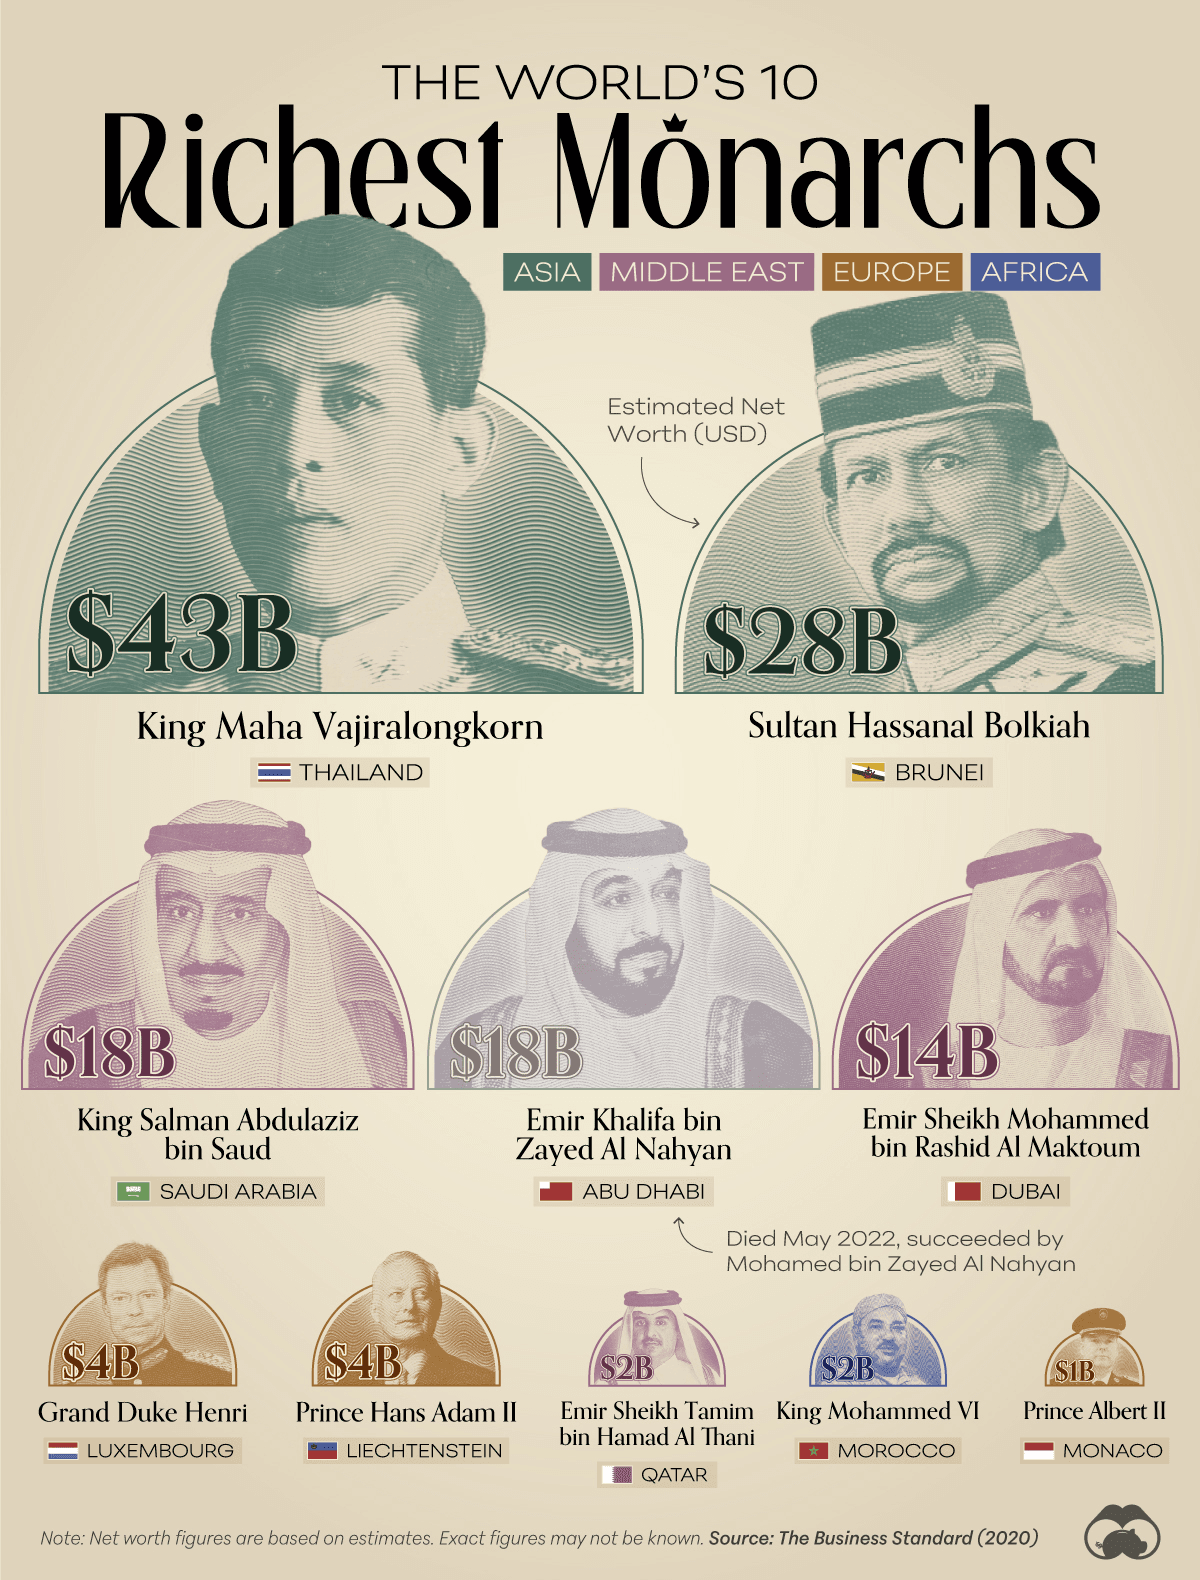 Asia's Monarchs Lead the World's Wealthiest Sovereigns 💰